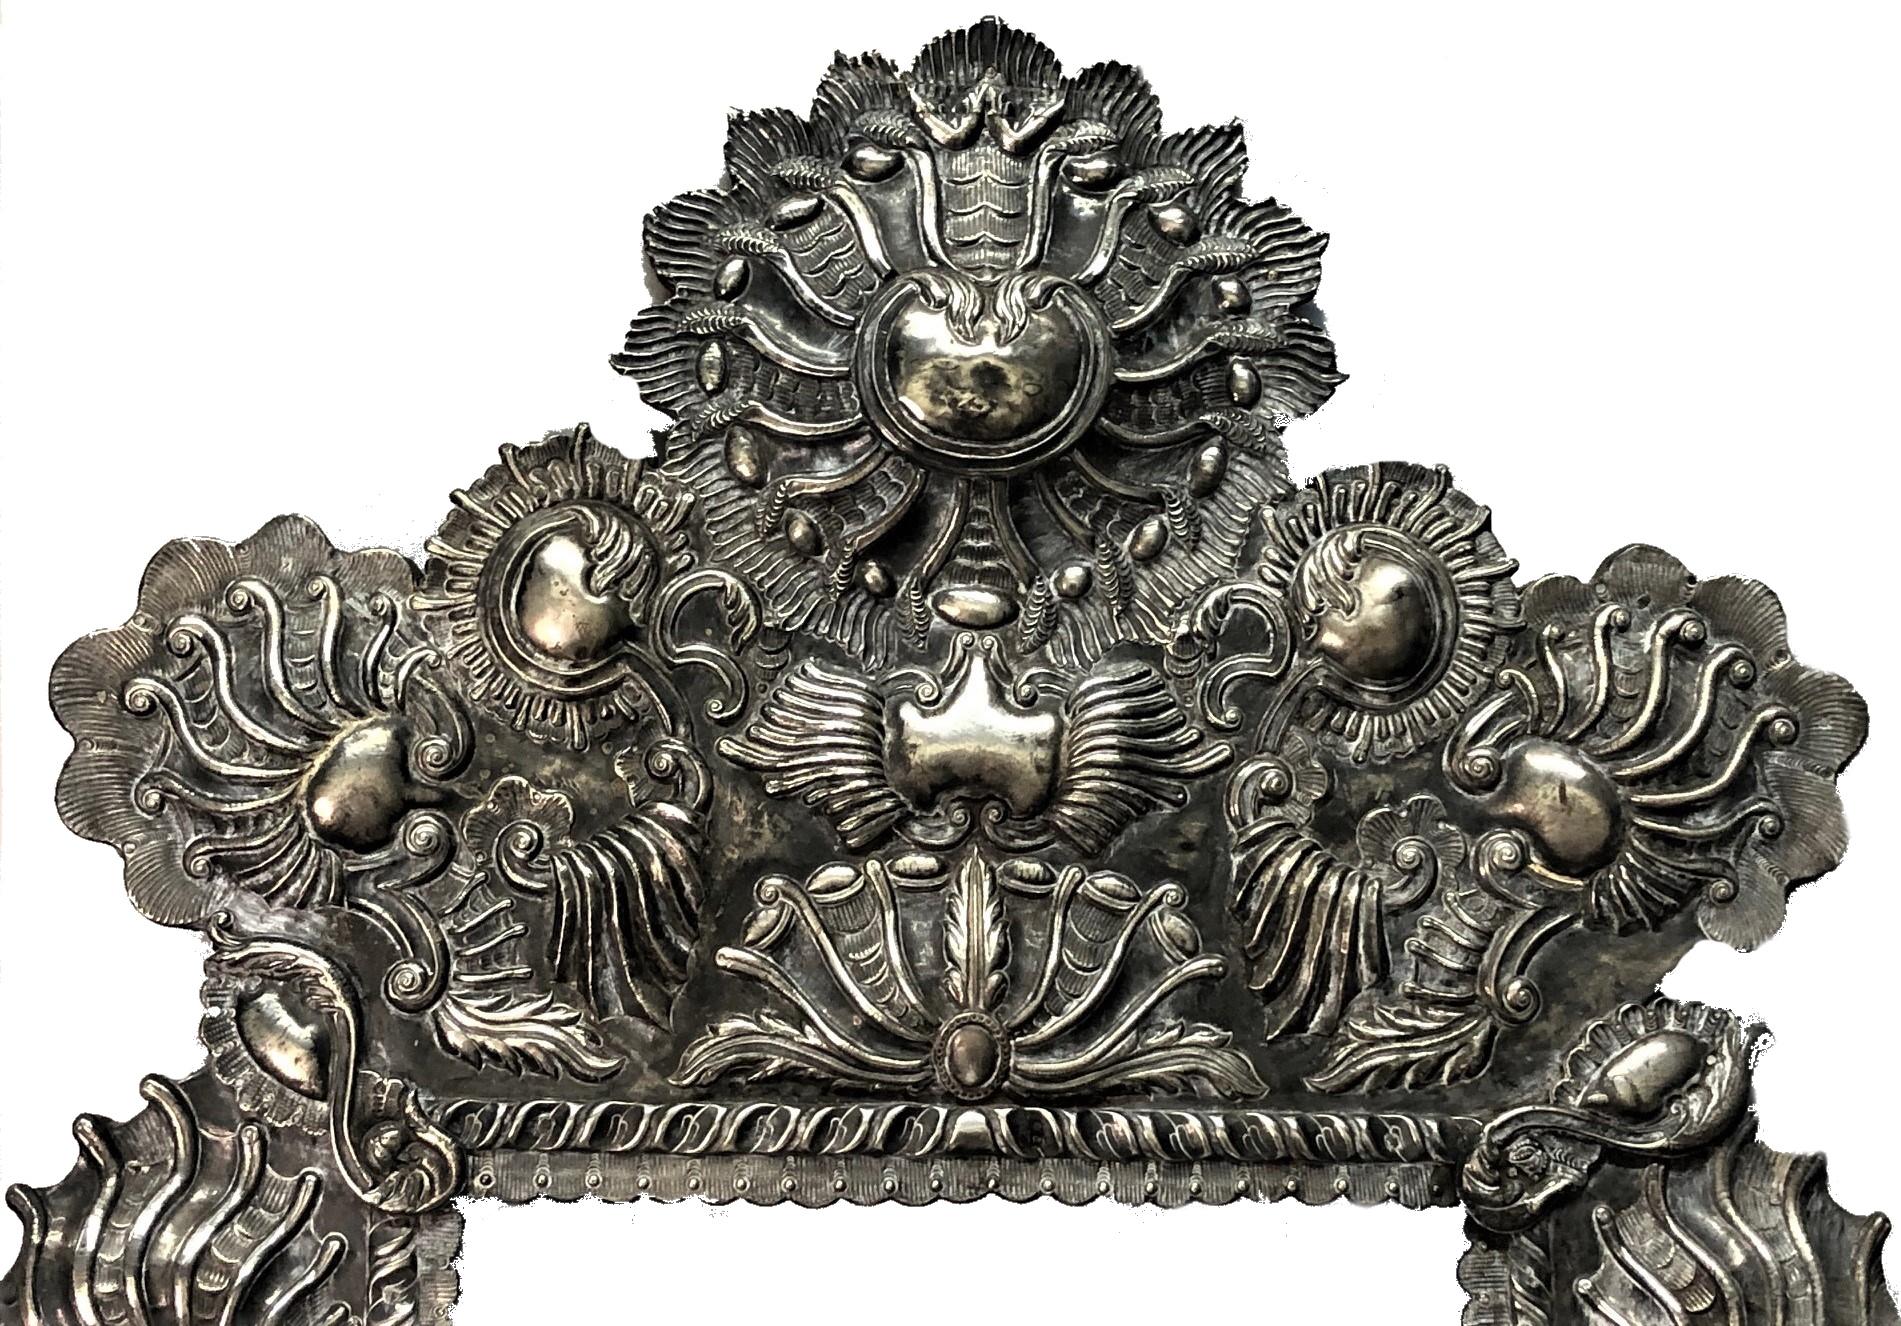 ABOUT FRAME
Handmade during 17th century, this frame is a grandiose piece of master craft by an extraordinary Spanish silversmith. Exceptionally complex, not only in its exquisite and elaborate design, but also with the use of several silver working